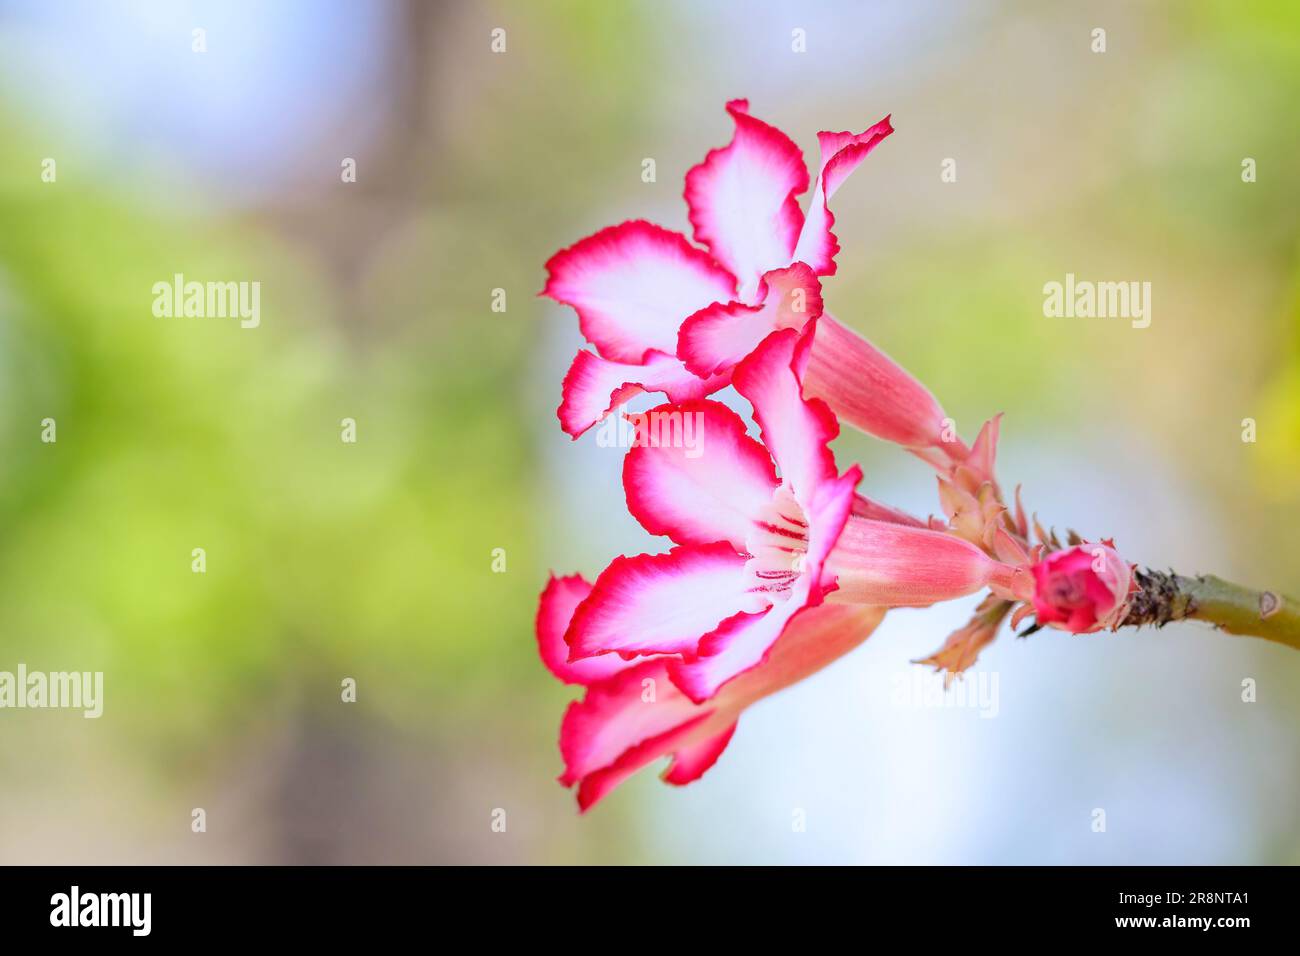 Impala Lily (Adenium multiflorum) close-up of flowers, Kruger National Park, South Africa. Stock Photo